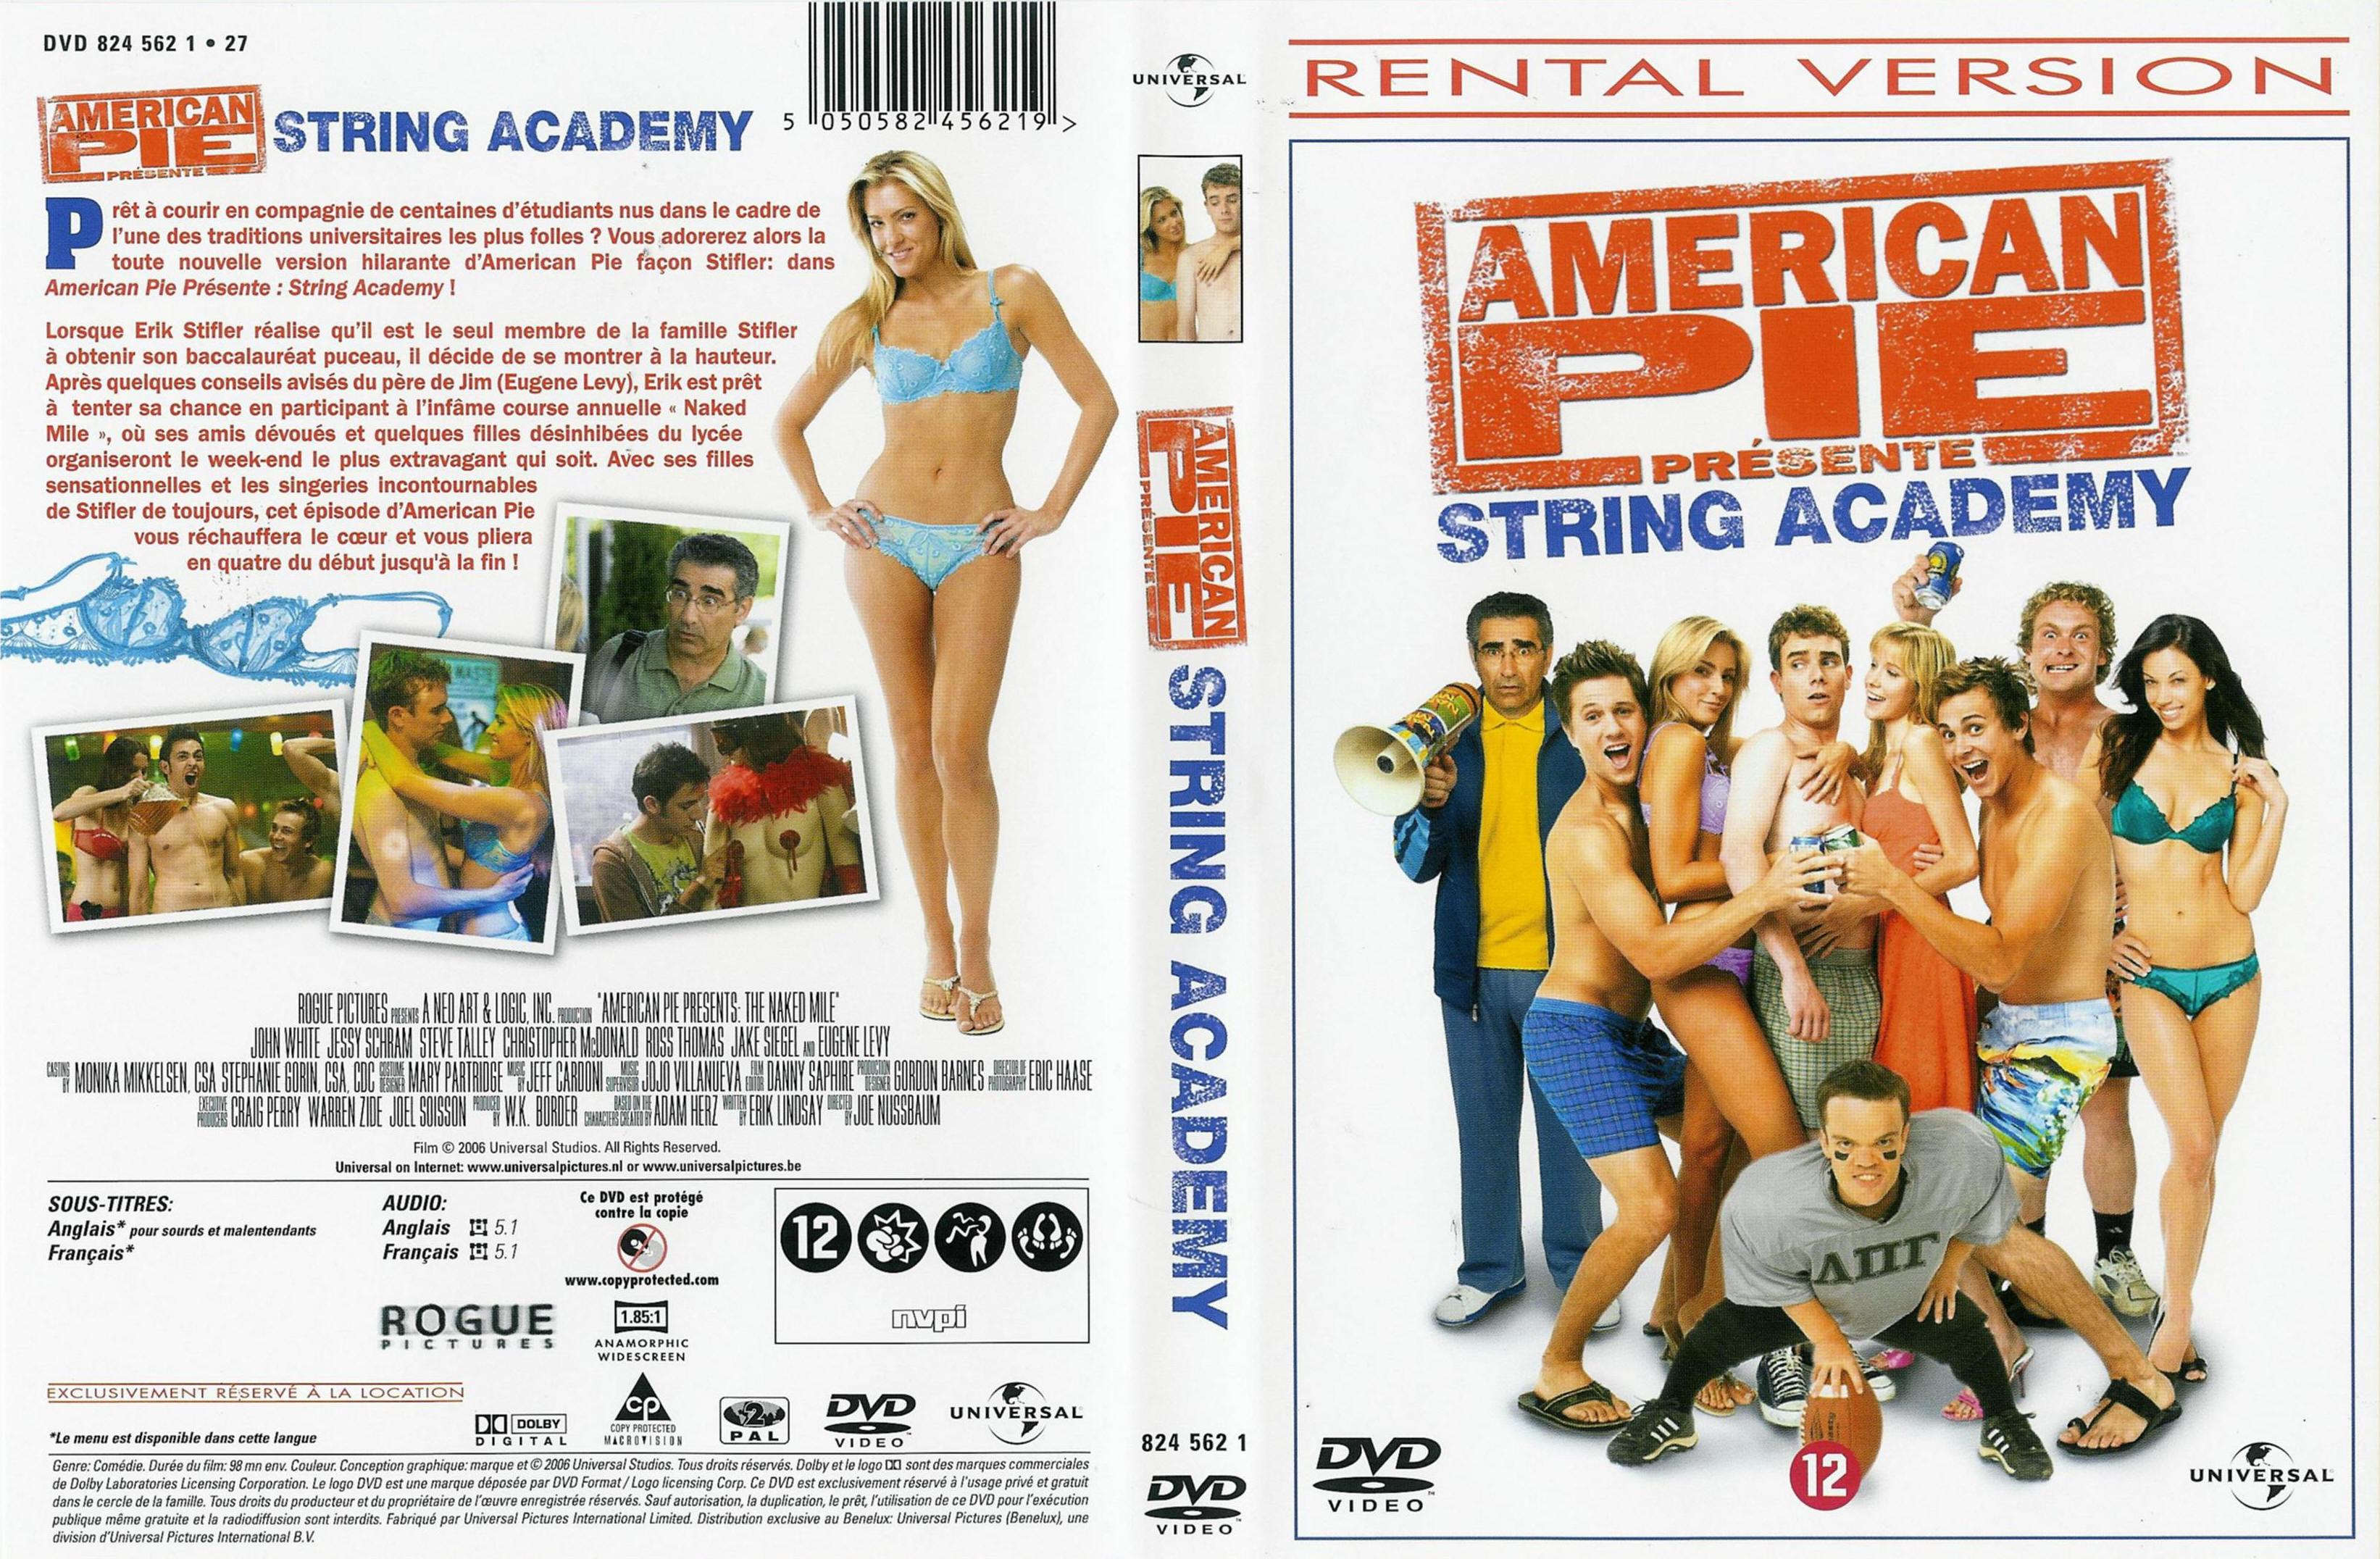 Jaquette DVD American Pie - String Academy v2